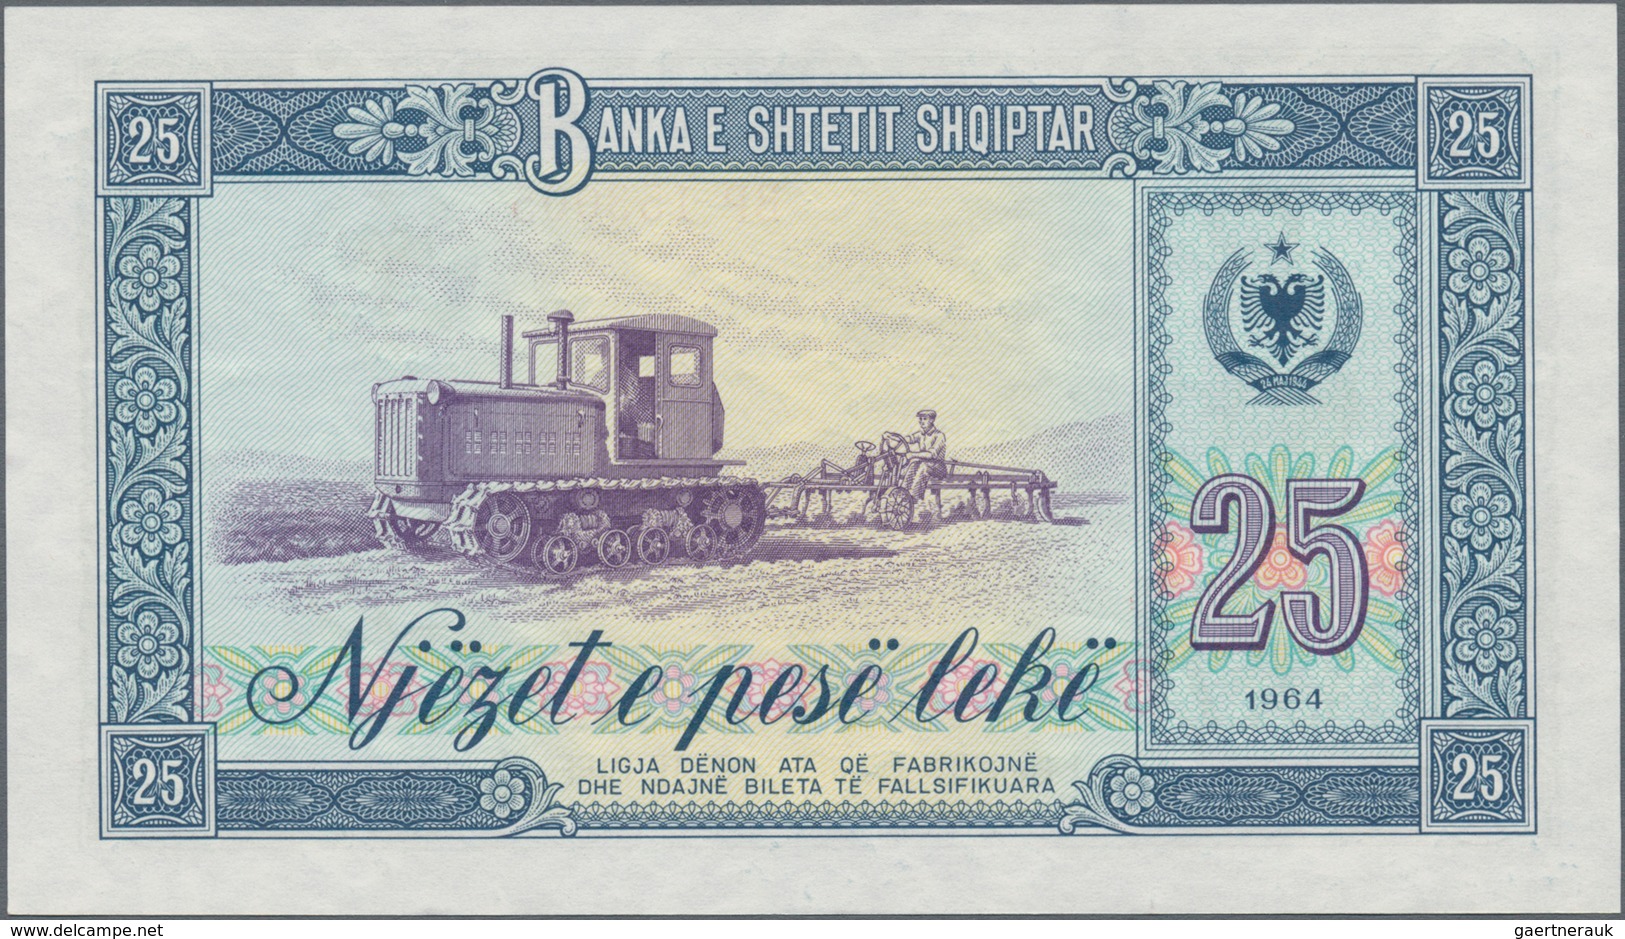 Albania / Albanien: Set with 15 banknotes of the 1964 and 1976 issue with 1, 3, 5, 10, 25, 50 and 10